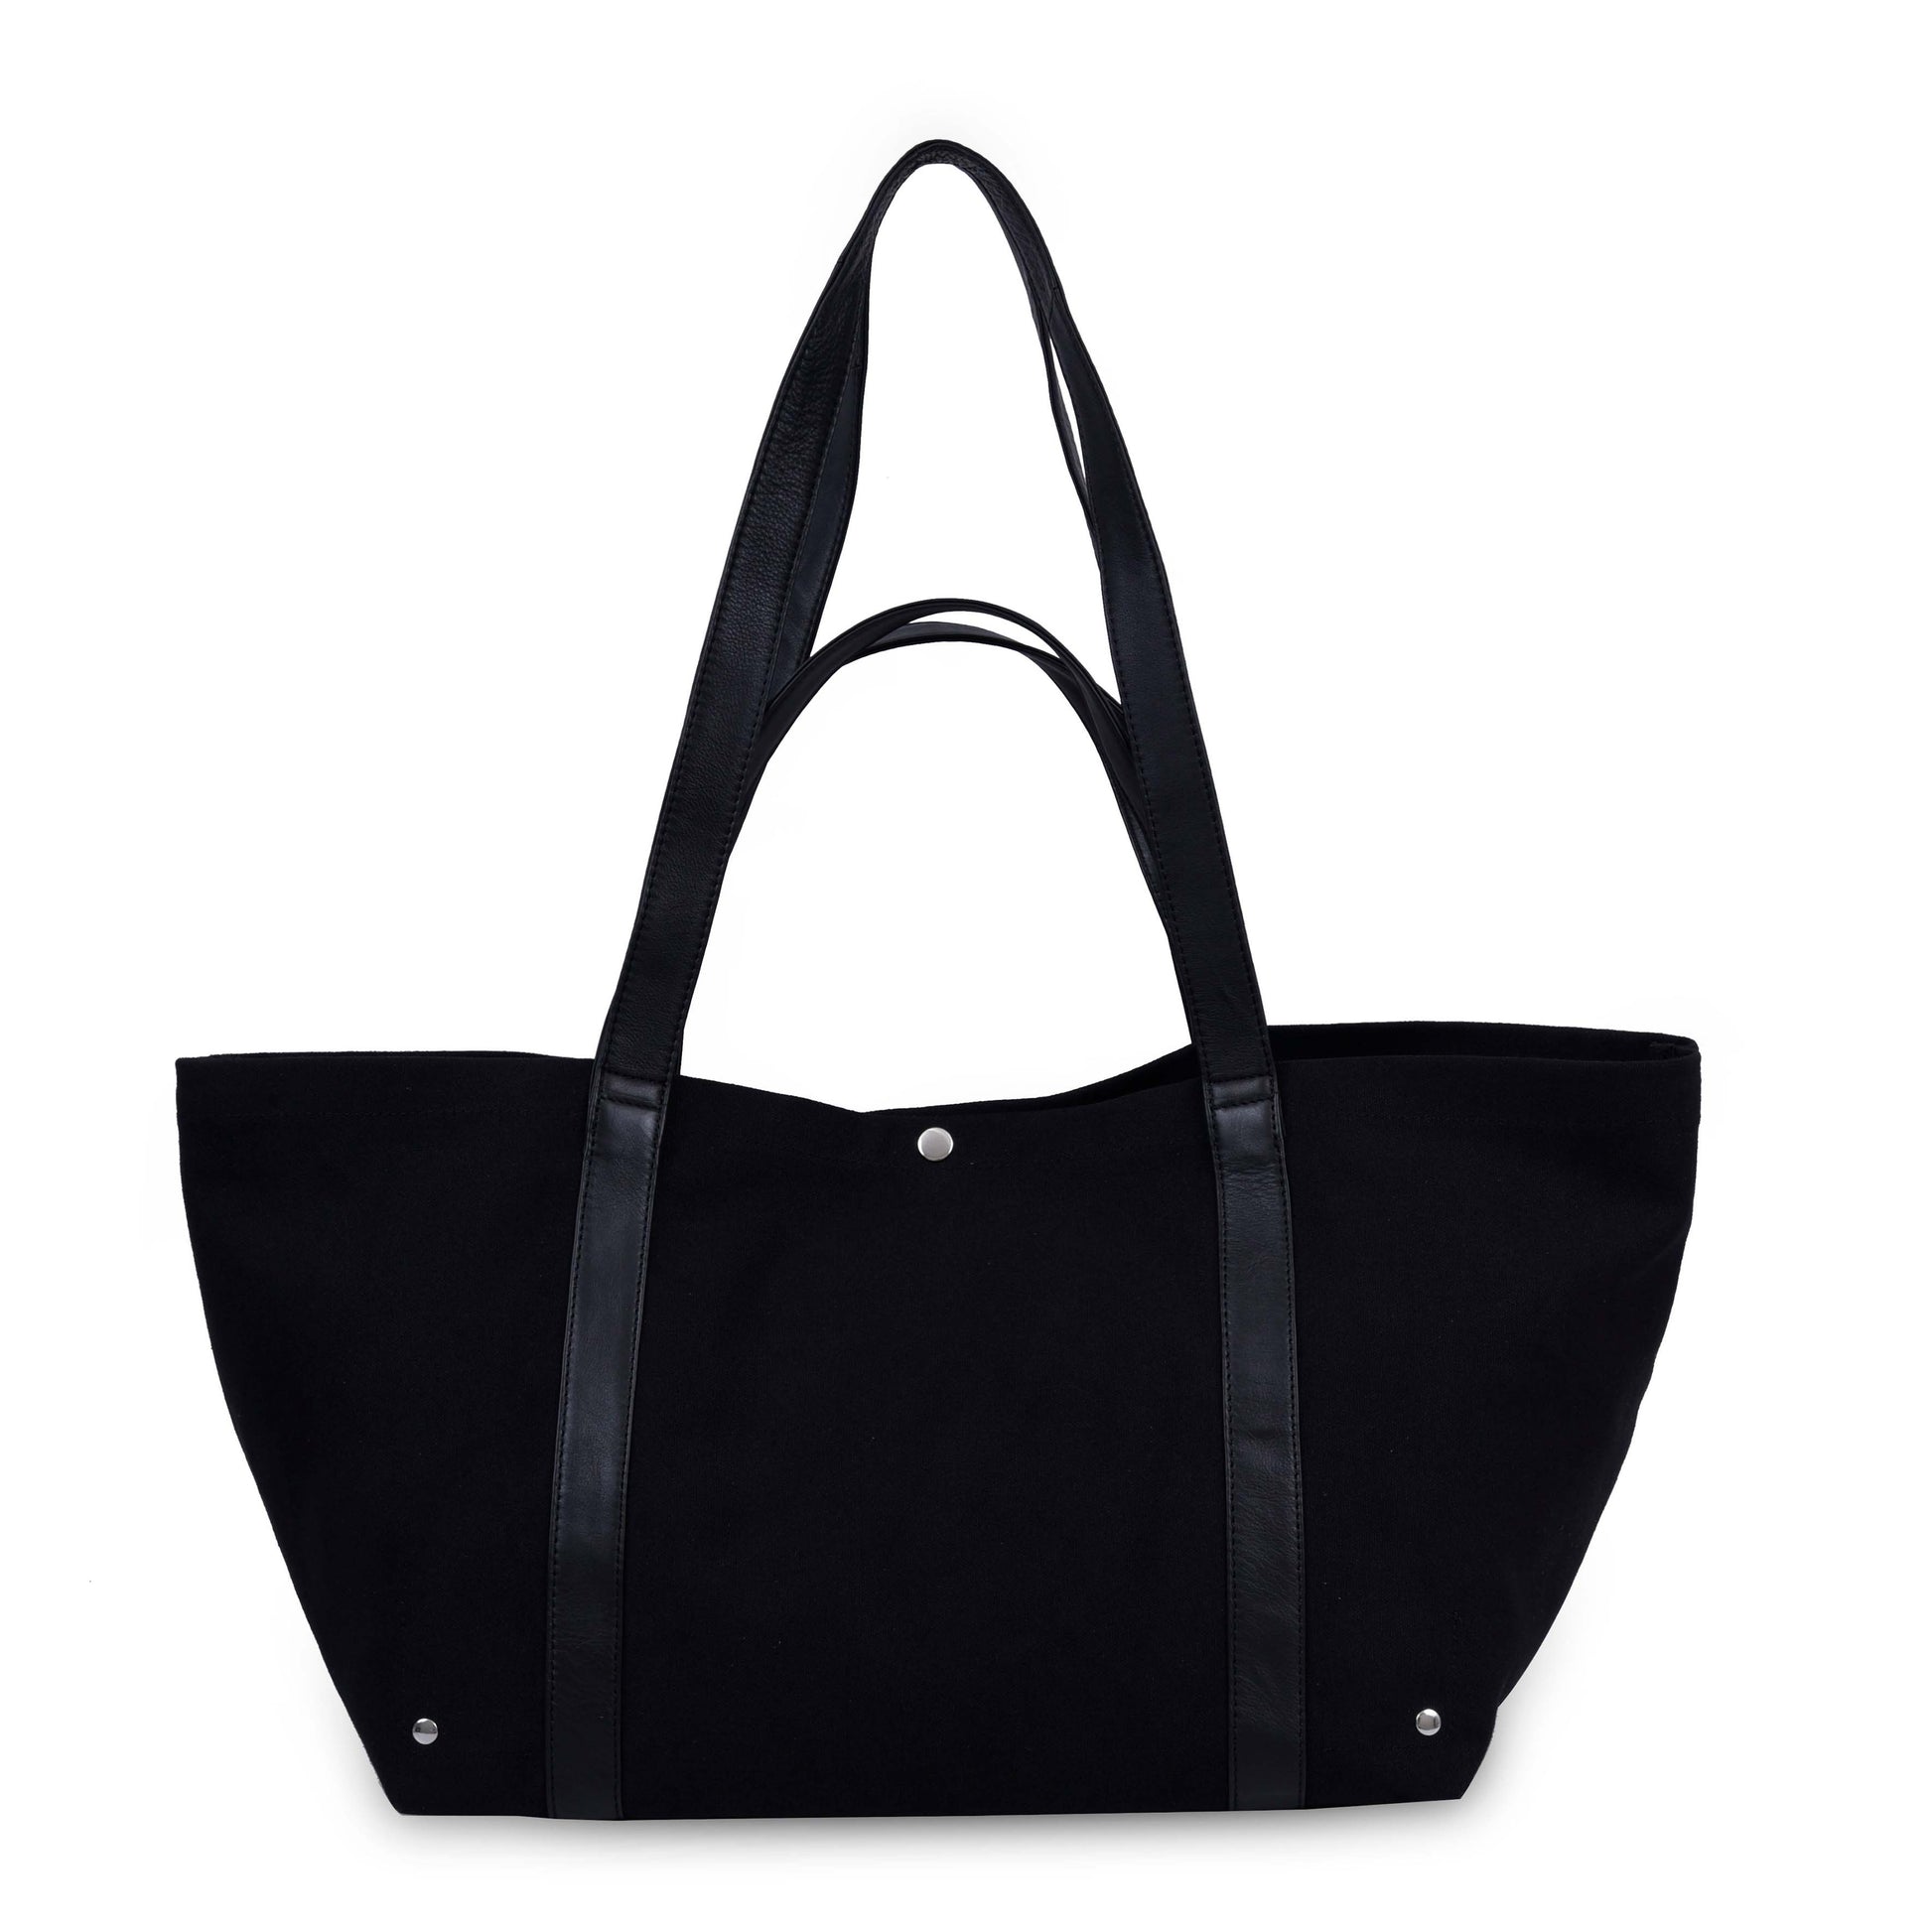 Núnoo Holiday Recycled Canvas Black Tote Black